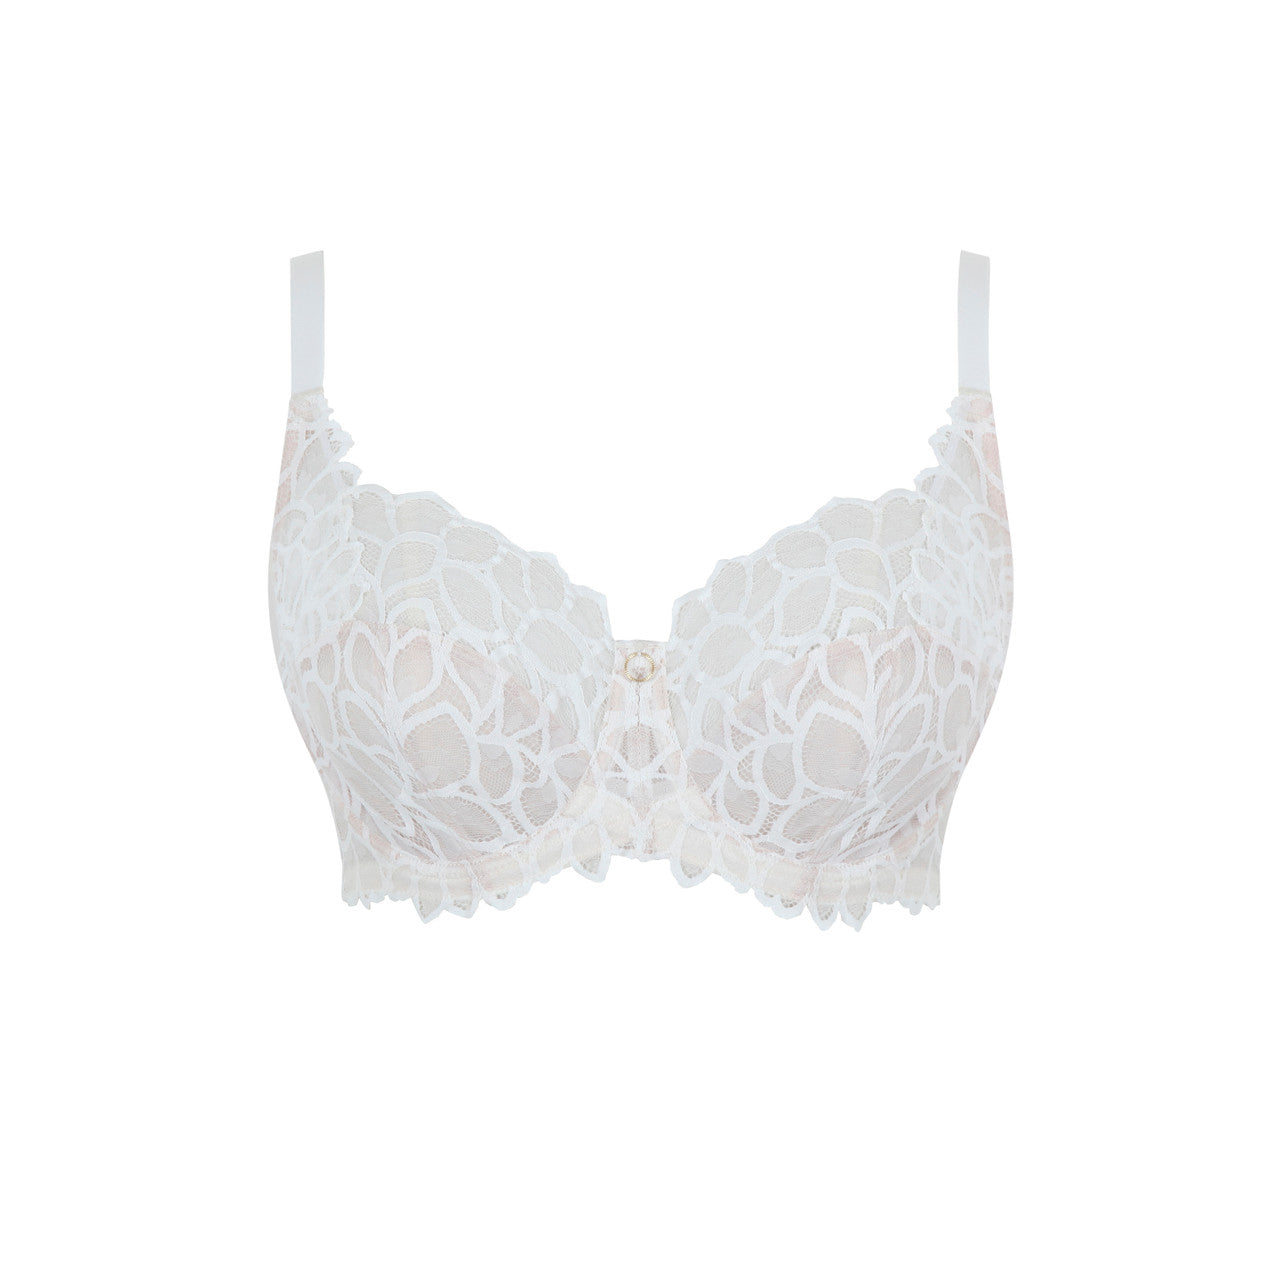 Product photo of panache Lingerie's Allure Full cup bra in ivory..